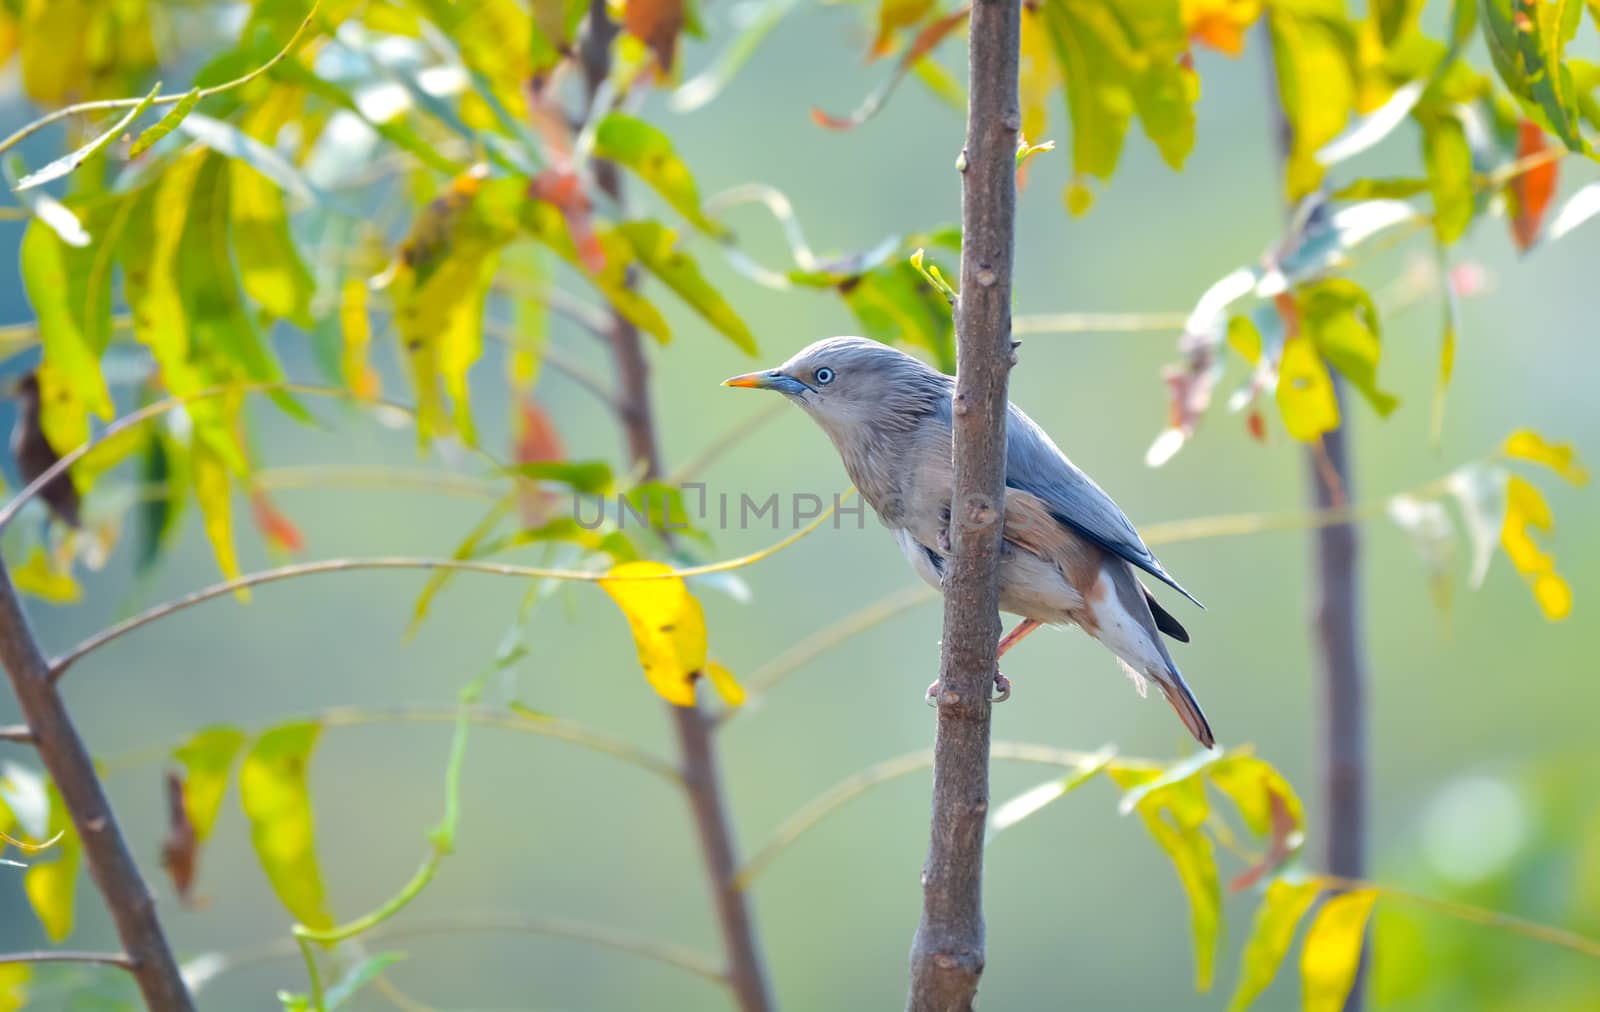 Chestnut-tailed starling sitting on a tree branch by rkbalaji